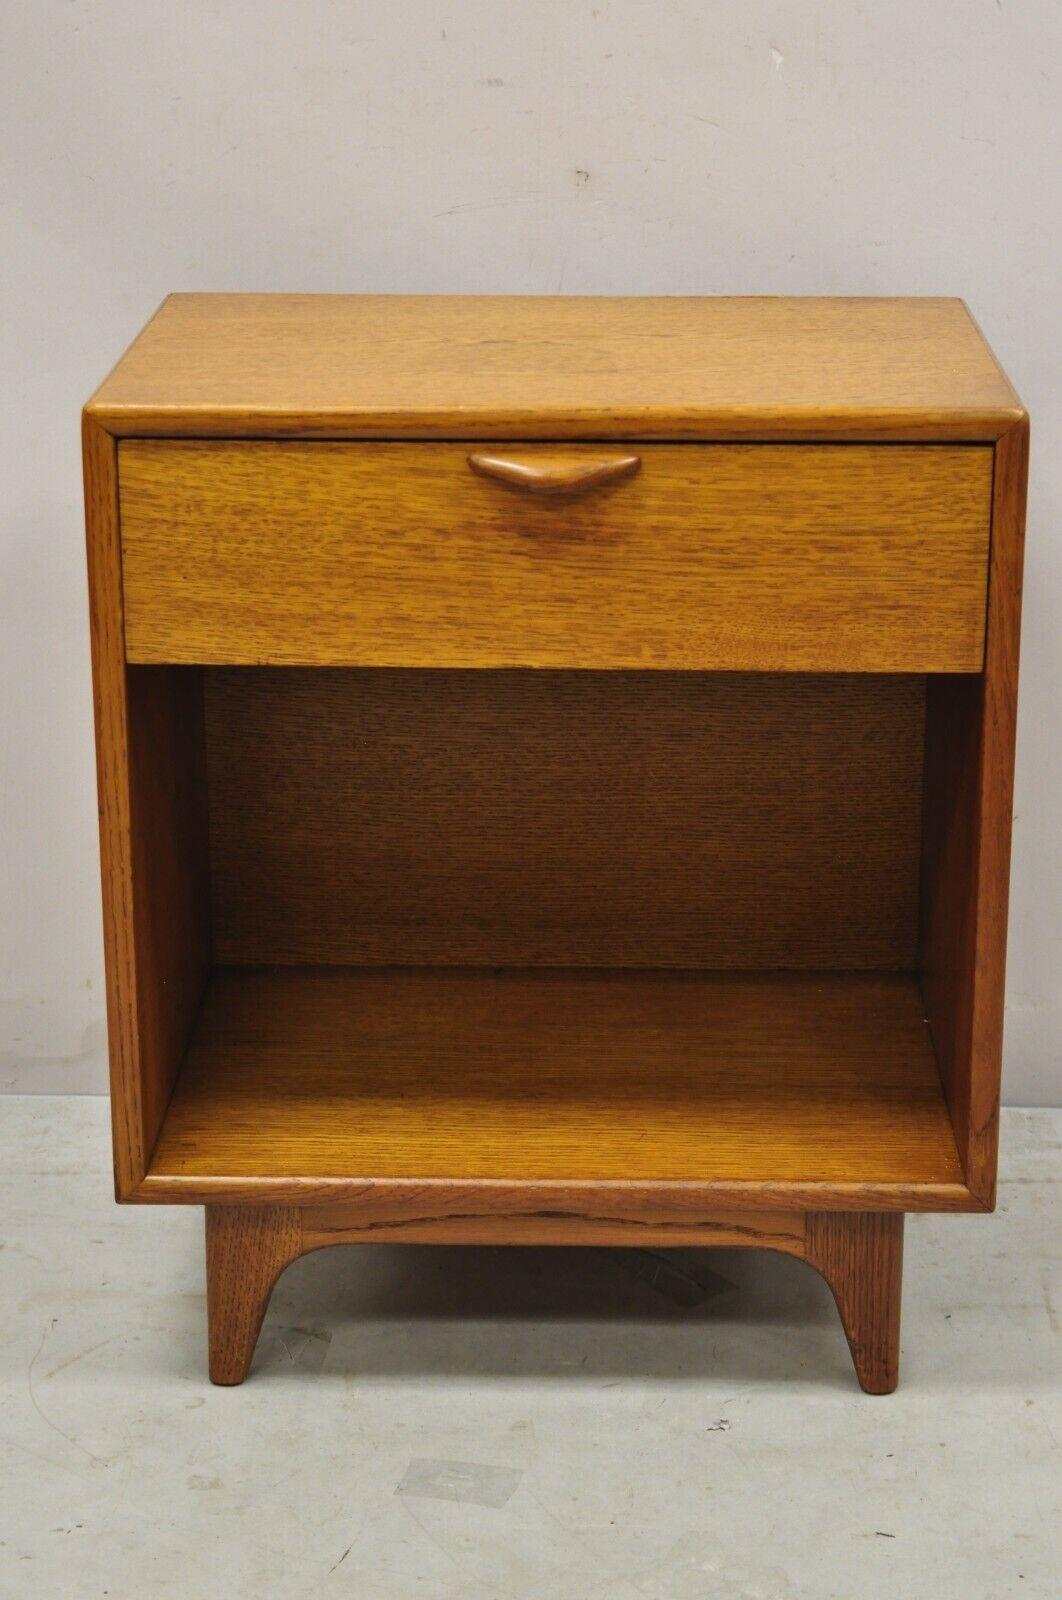 Lane Perception oak Mid-Century Modern one drawer nightstand side table. Item features sculpted wood drawer pull, beautiful wood grain, original stamp, tapered legs, very nice vintage item, quality American craftsmanship. Circa mid-20th